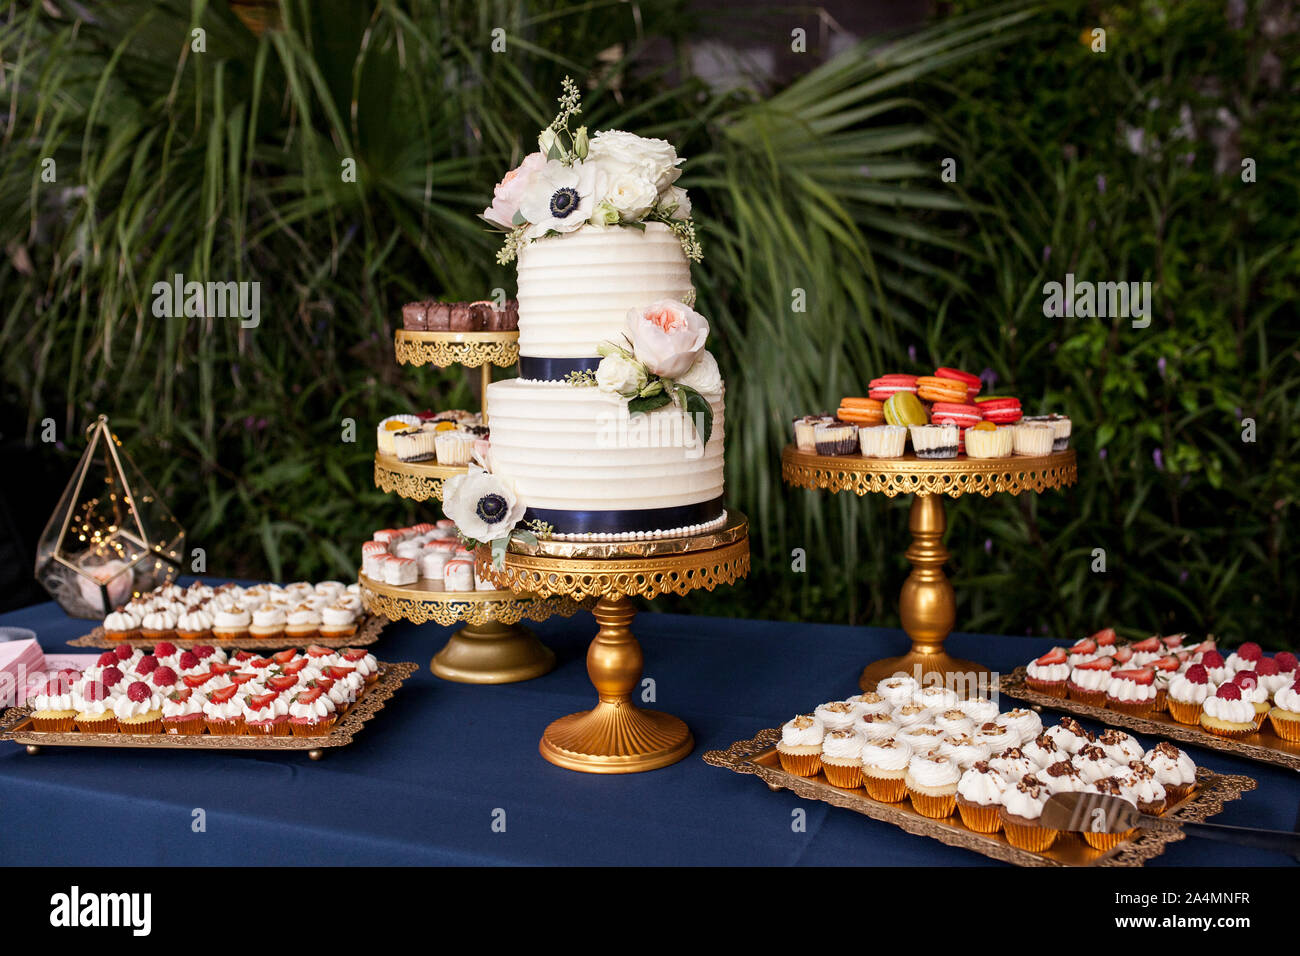 https://c8.alamy.com/comp/2A4MNFR/dessert-table-with-two-tiered-cake-at-wedding-reception-or-party-2A4MNFR.jpg